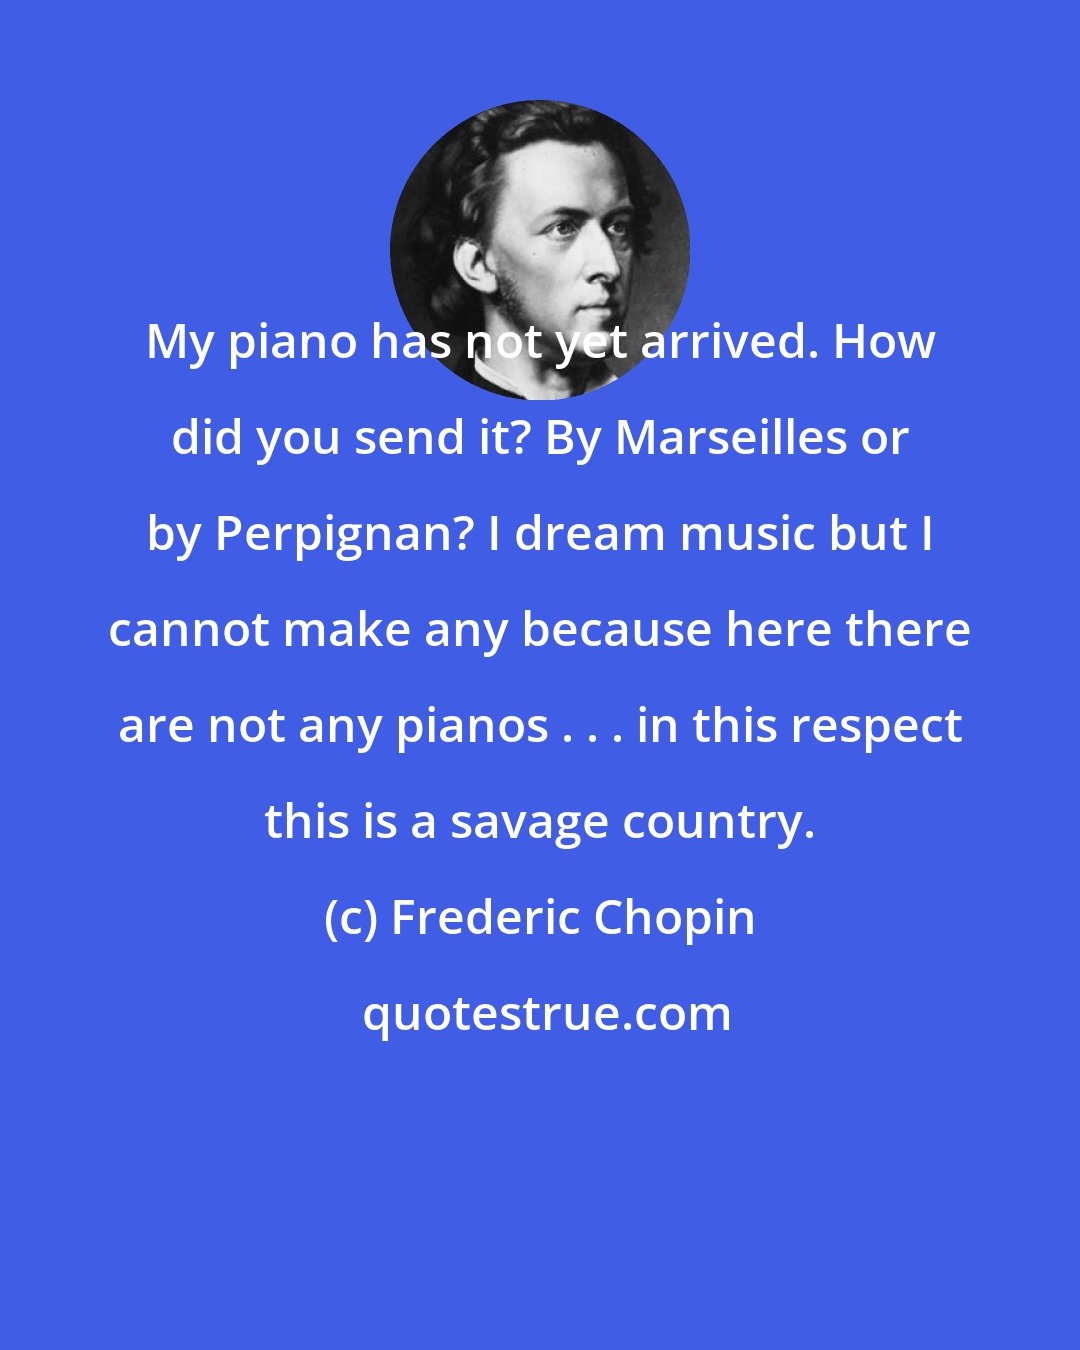 Frederic Chopin: My piano has not yet arrived. How did you send it? By Marseilles or by Perpignan? I dream music but I cannot make any because here there are not any pianos . . . in this respect this is a savage country.